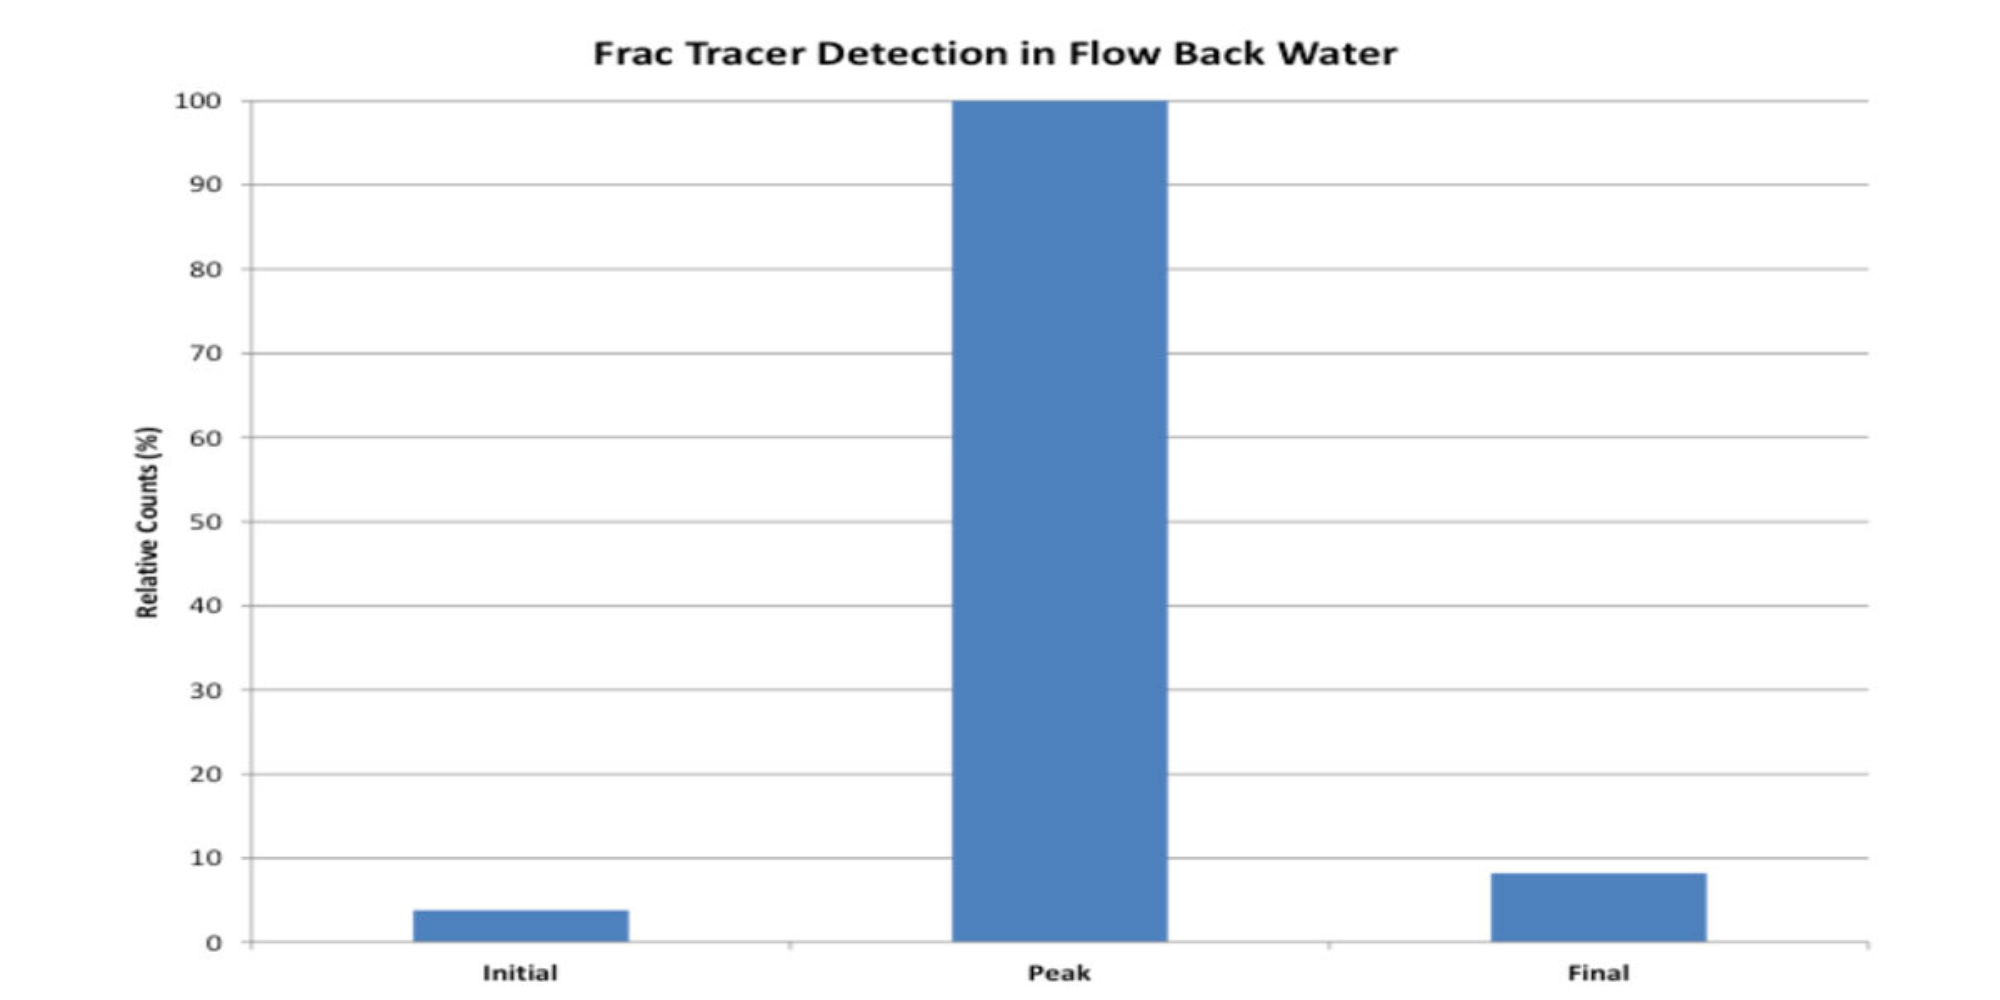 Oil Field based Frac Tracers in flow back water; research conducted by Engenium using Wilson’s Instrumentation.